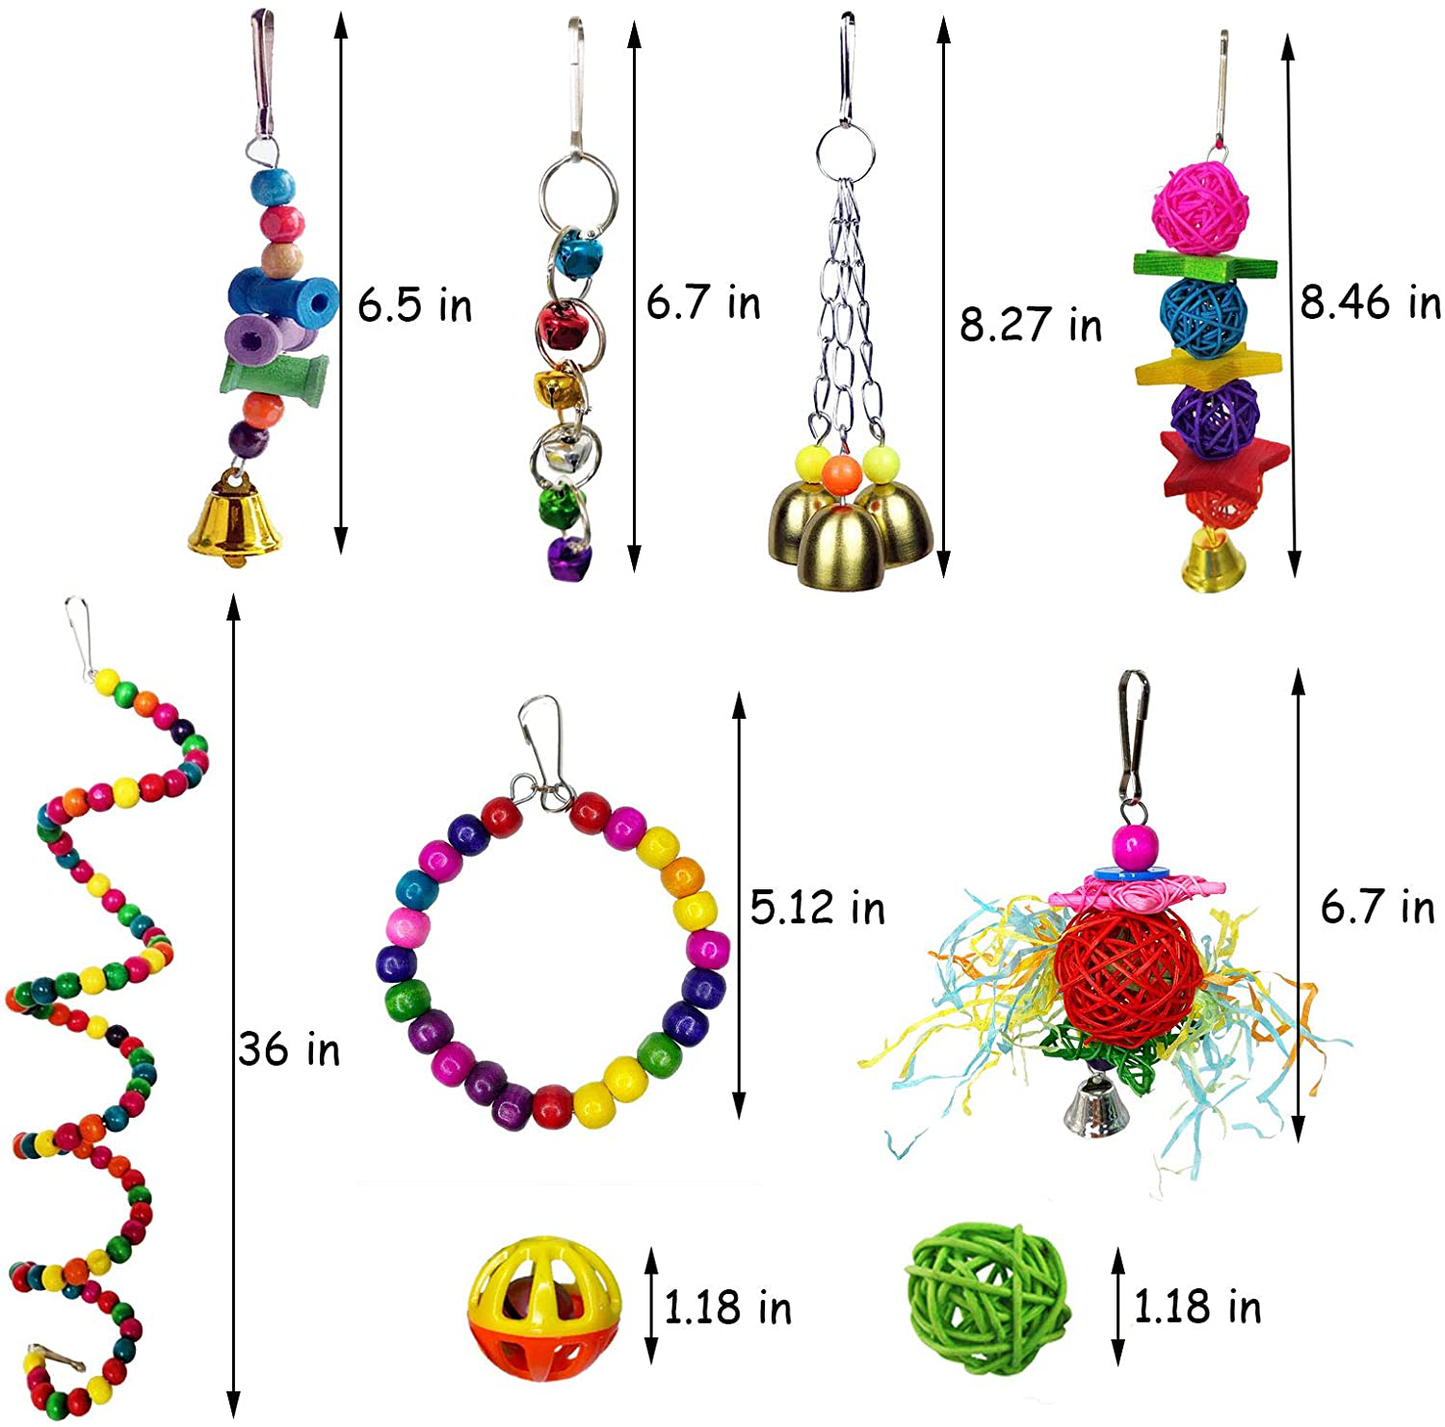 Kathson 17 Packs Bird Toys Parrot Swing Chewing Toys, Hanging Bell Birds Cage Toys Colorful Toy for Small Parakeets, Conures, Cockatiels, Macaws, Finches, Love Birds